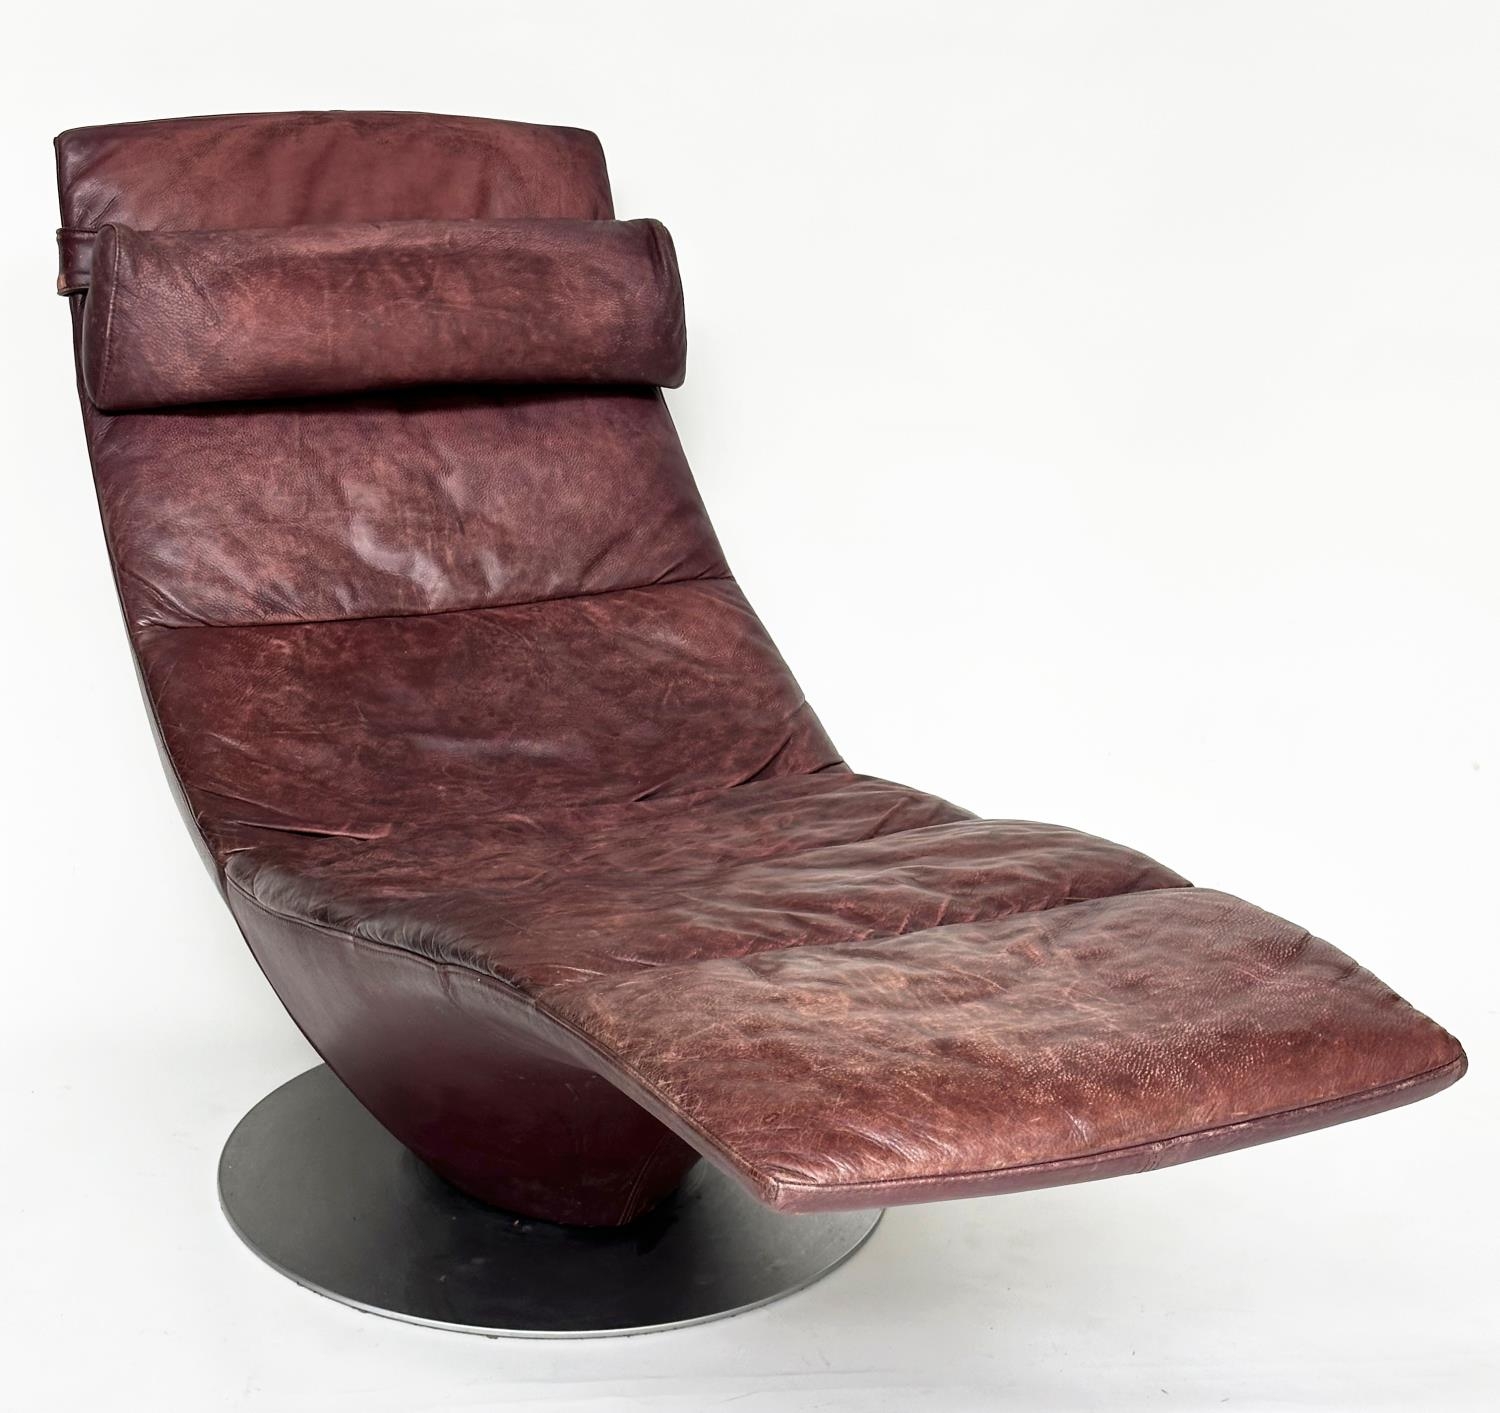 NATUZZI CHAISE, stitched leather revolving on circular steel support, 173cm W. - Image 8 of 11